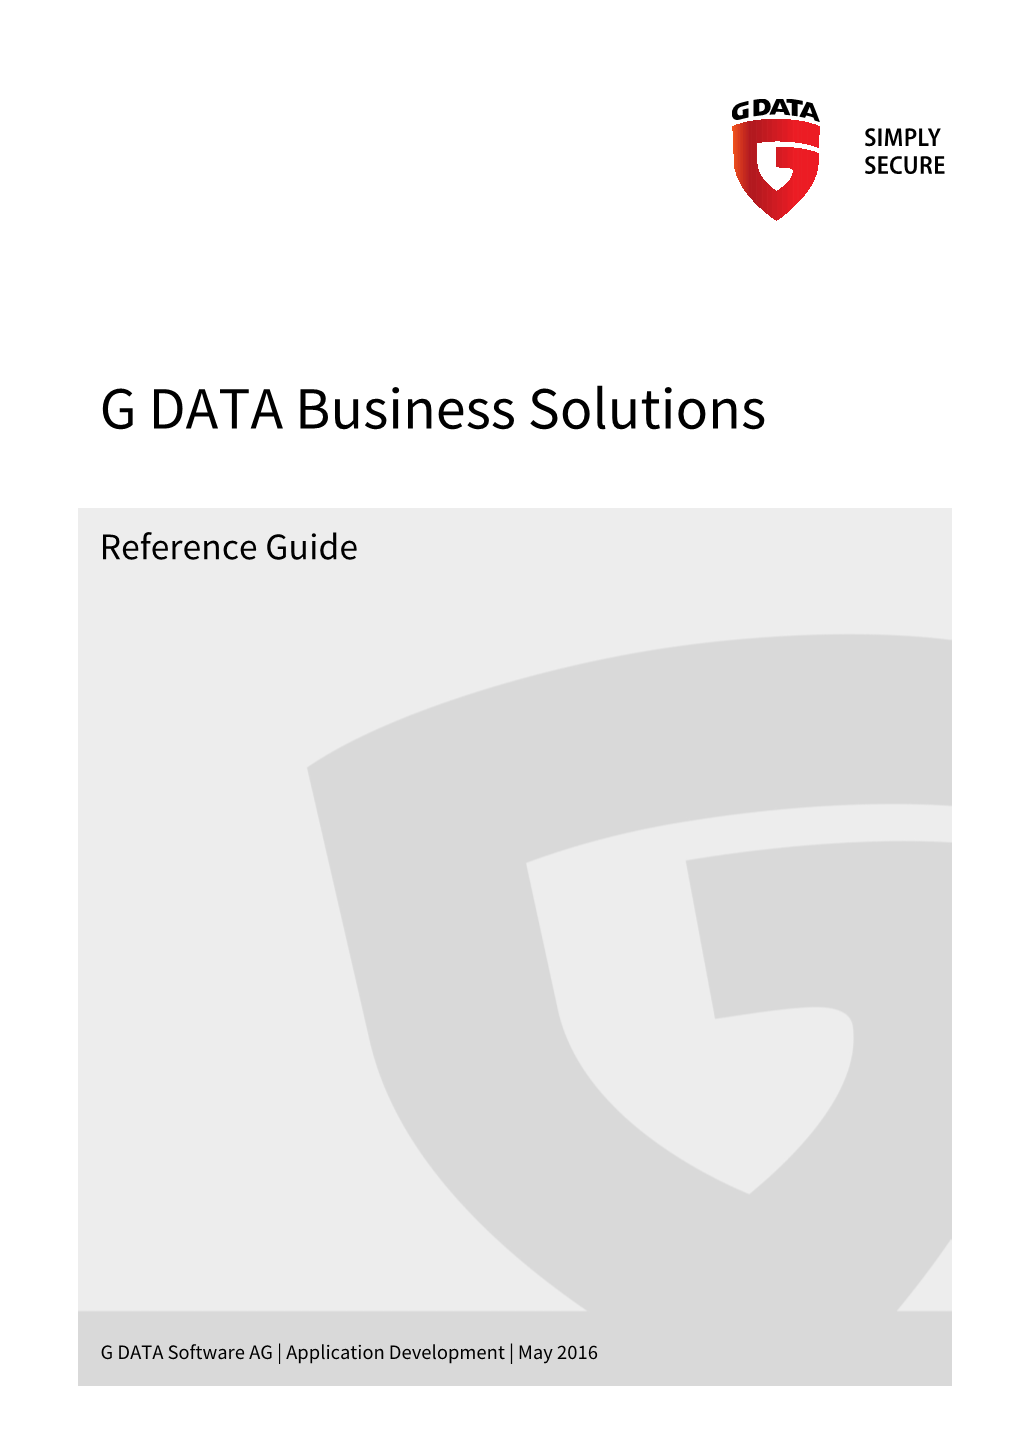 G DATA Business Solutions Reference Guide